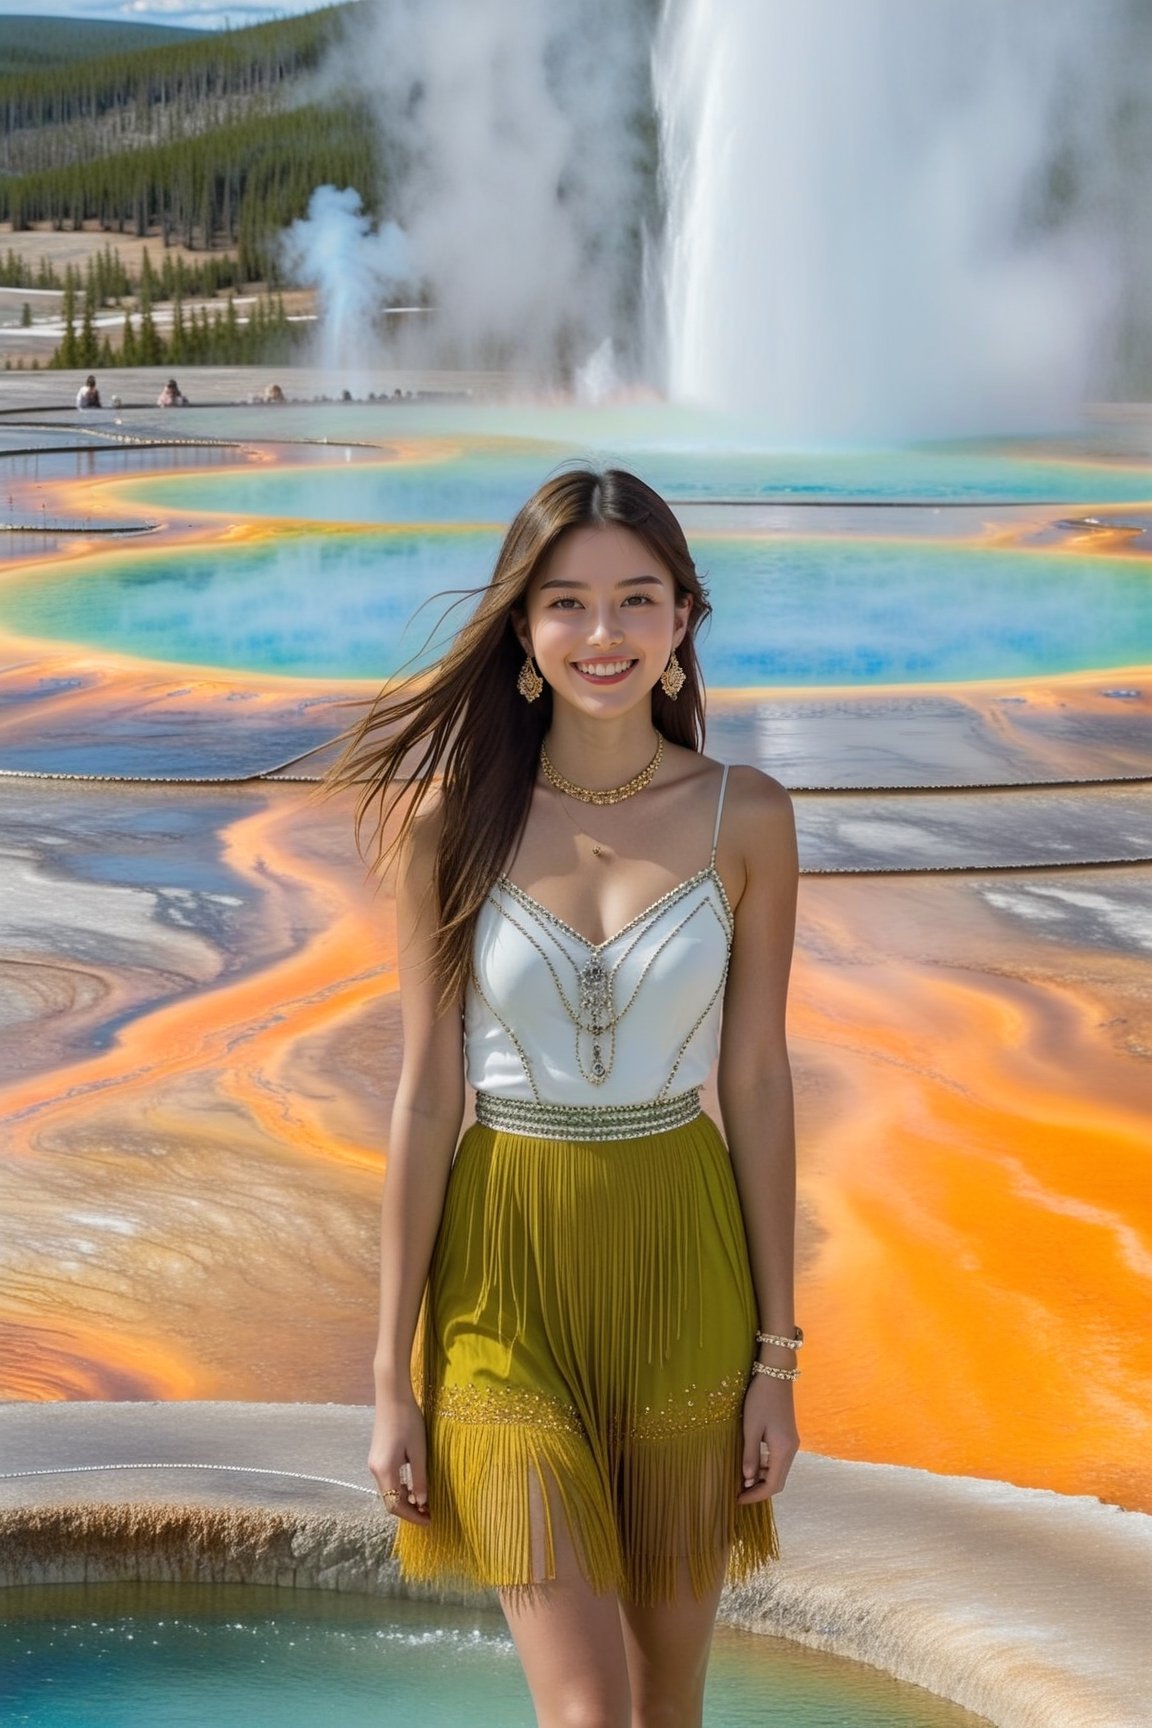 Hyper-Realistic photo of a girl,20yo,1girl,perfect female form,perfect body proportion,perfect anatomy,[green and yellow color],elegant dress,detailed exquisite face,soft shiny skin,smile,mesmerizing,detailed shiny long hair blowing,small earrings,necklaces,Chanel bag,cluttered maximalism
BREAK
[backdrop of grandpr1smat1c,Grand Prismatic Spring of Yellowstone,vivid color for Spring,orange mane-like soil around the pool,brown and white soil color,smoke from spring,brown and white color soil,1 spring],(fullbody:1.3),(distant view:1.3),(girl focus:1.2)
BREAK
(rule of thirds:1.3),perfect composition,studio photo,trending on artstation,(Masterpiece,Best quality,32k,UHD:1.4),(sharp focus,high contrast,HDR,hyper-detailed,intricate details,ultra-realistic,award-winning photo,ultra-clear,kodachrome 800:1.25),(infinite depth of perspective:2),(chiaroscuro lighting,soft rim lighting:1.15),by Karol Bak,Antonio Lopez,Gustav Klimt and Hayao Miyazaki,photo_b00ster,real_booster,art_booster,Ye11owst0ne,koh_yunjung,ink ,kwon-nara